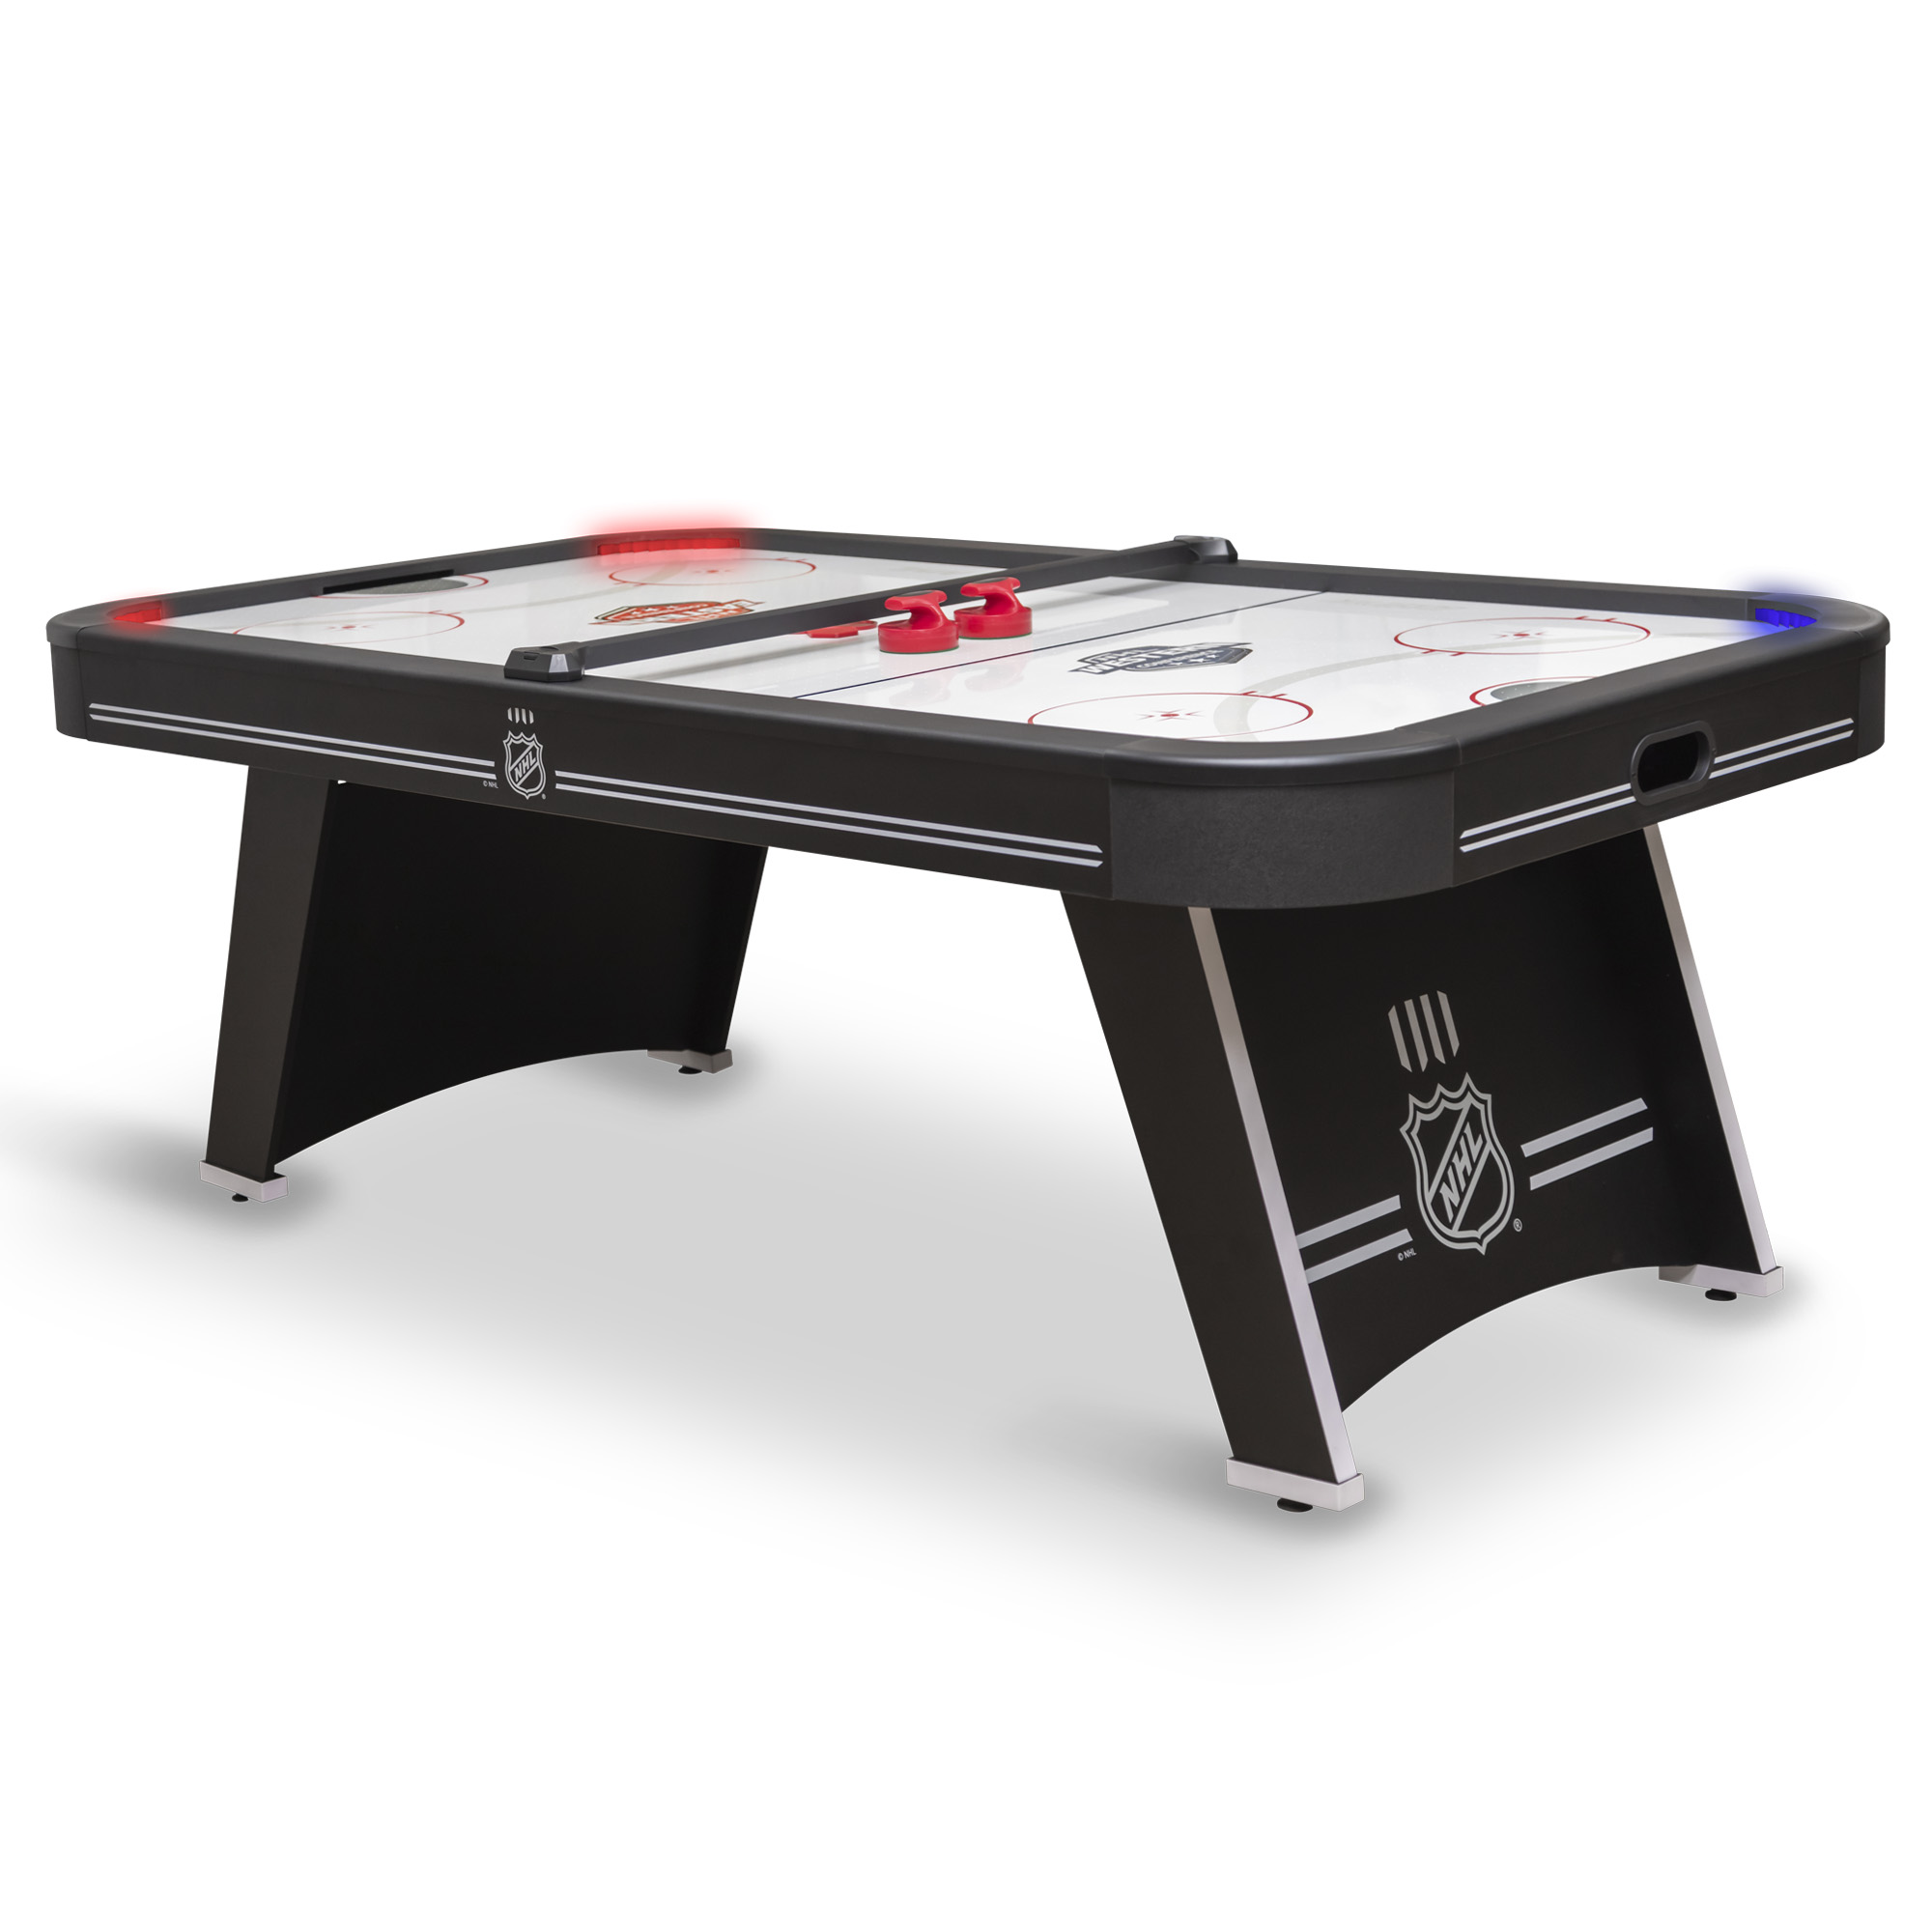 NHL Power Play Pro 84" Indoor Air Hockey Table with Overhead Projection LED Scoring and Light-Up Power Corners - image 1 of 8